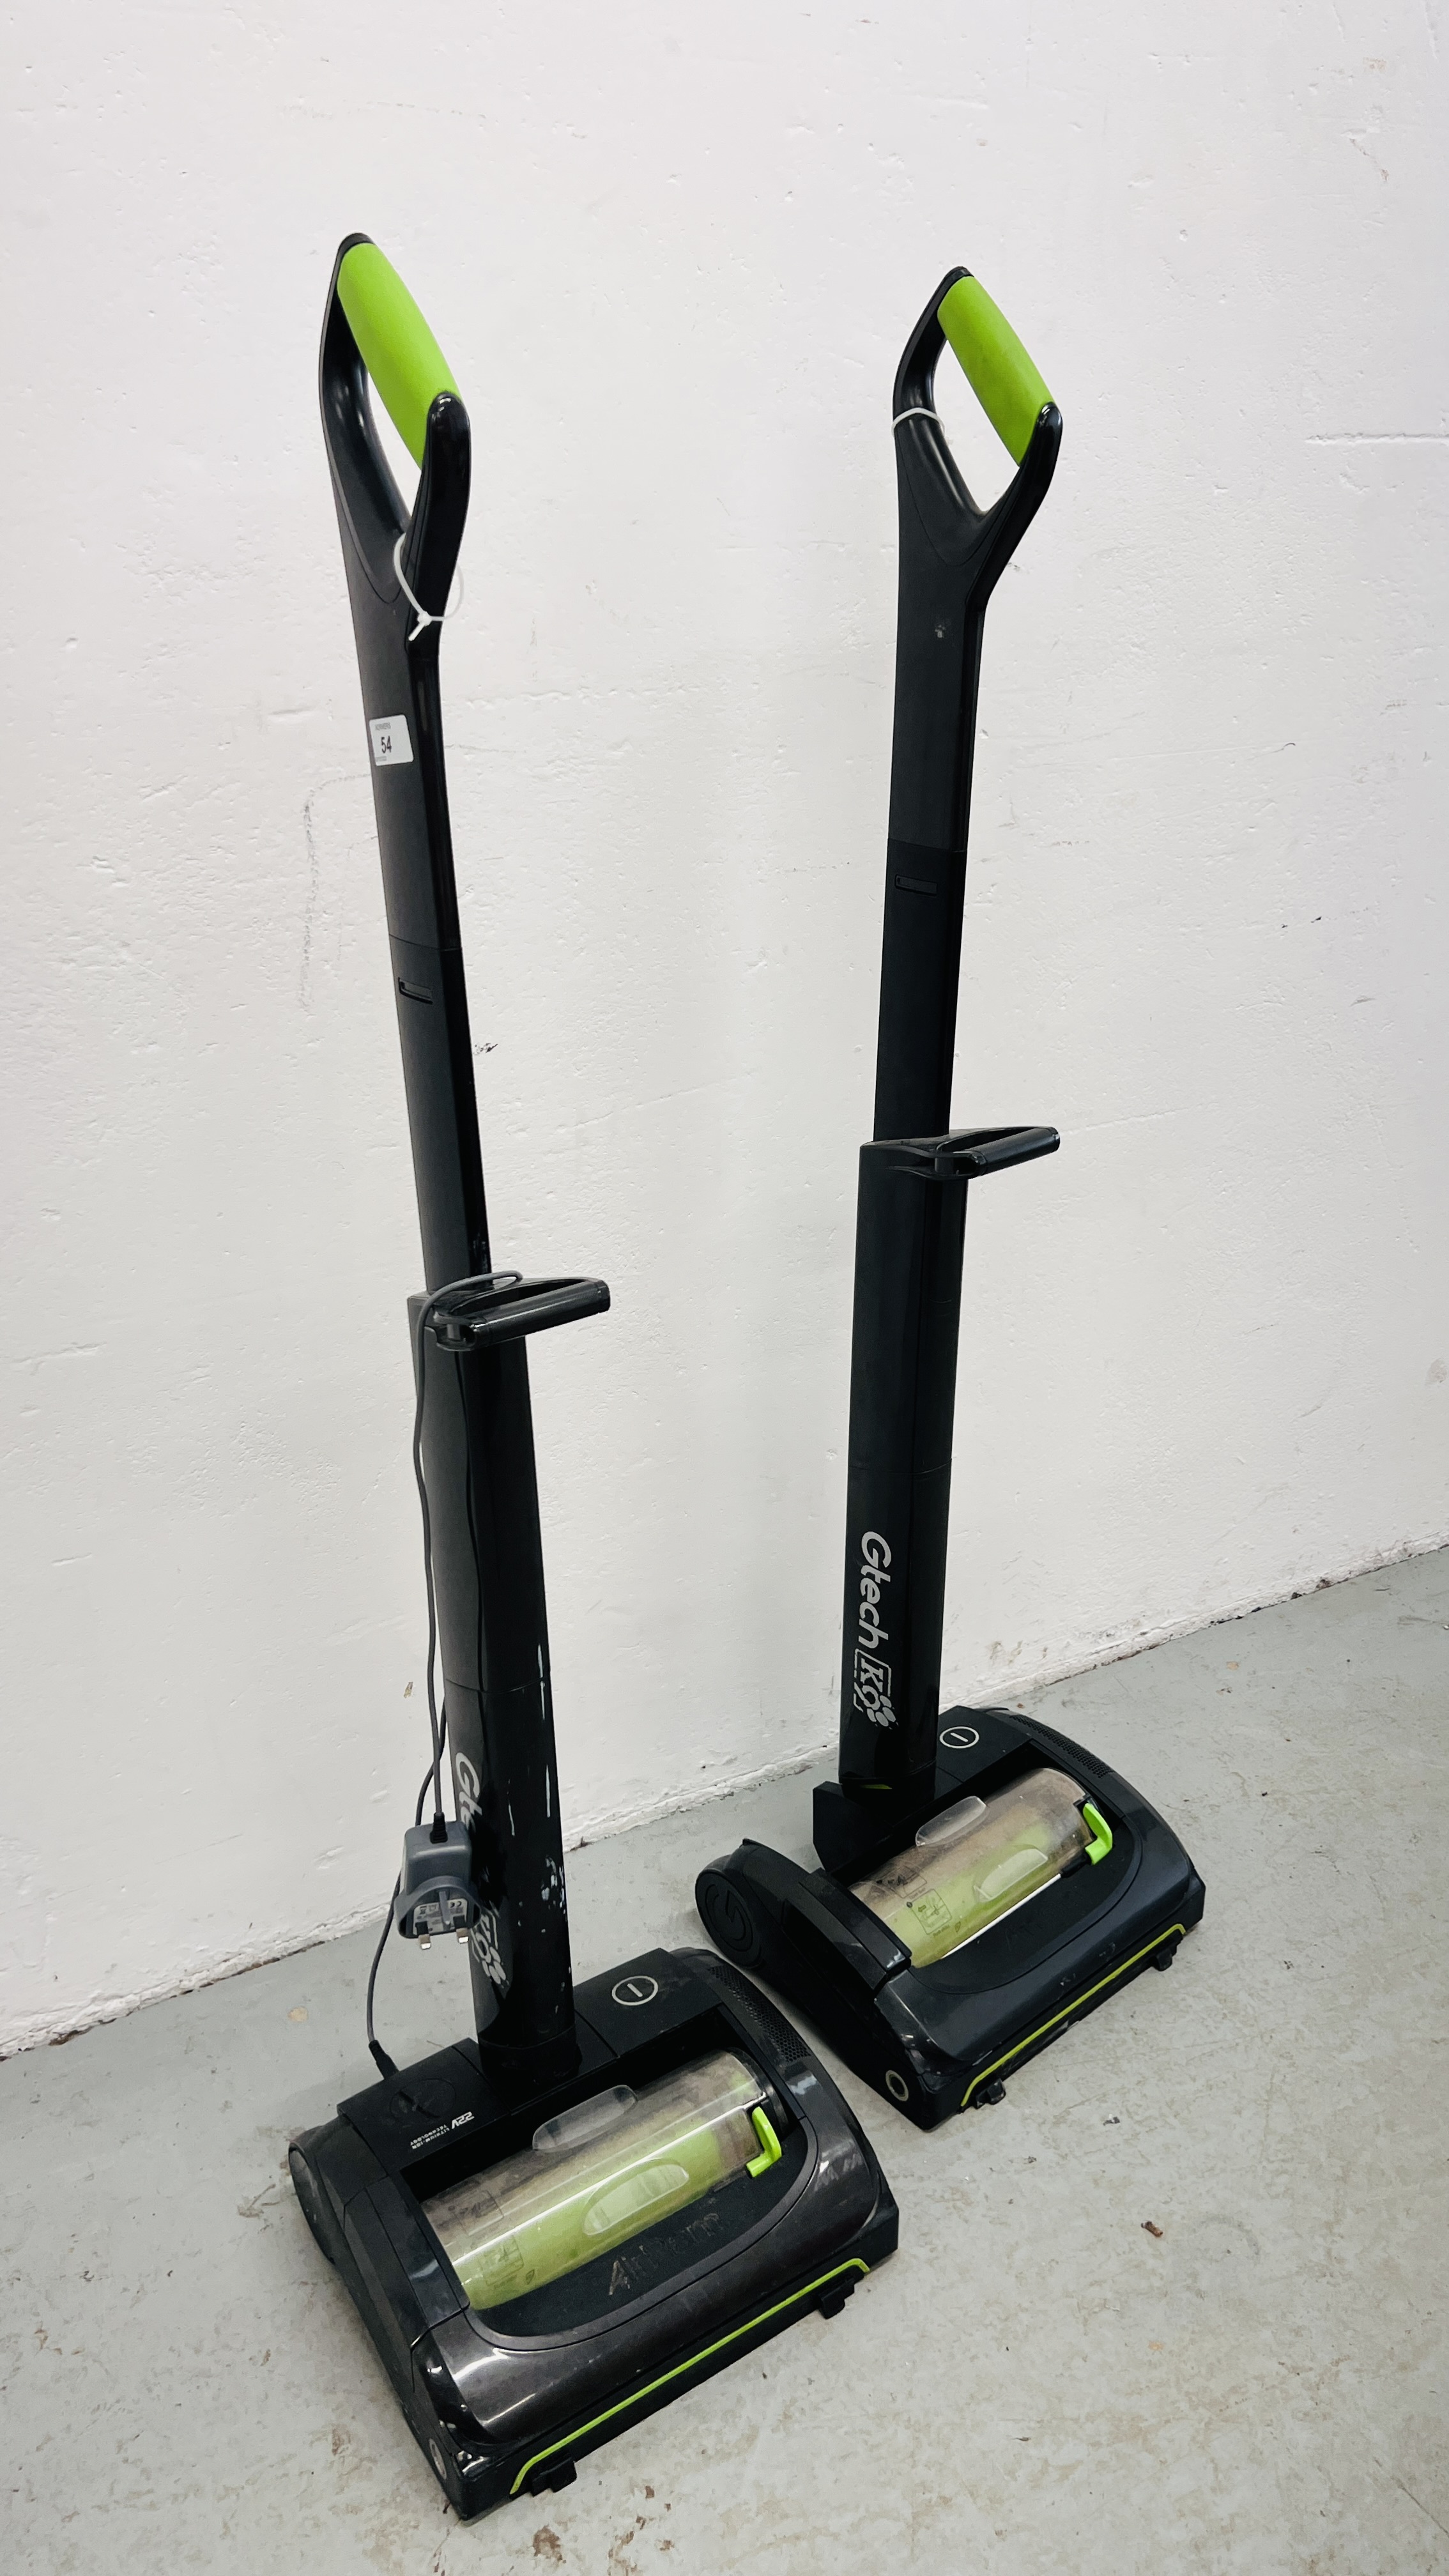 TWO GTECH K9 AIR RAM 22V LITHIUM-ION CORDLESS VACUUM CLEANERS COMPLETE WITH ONE BATTERY AND CHARGER